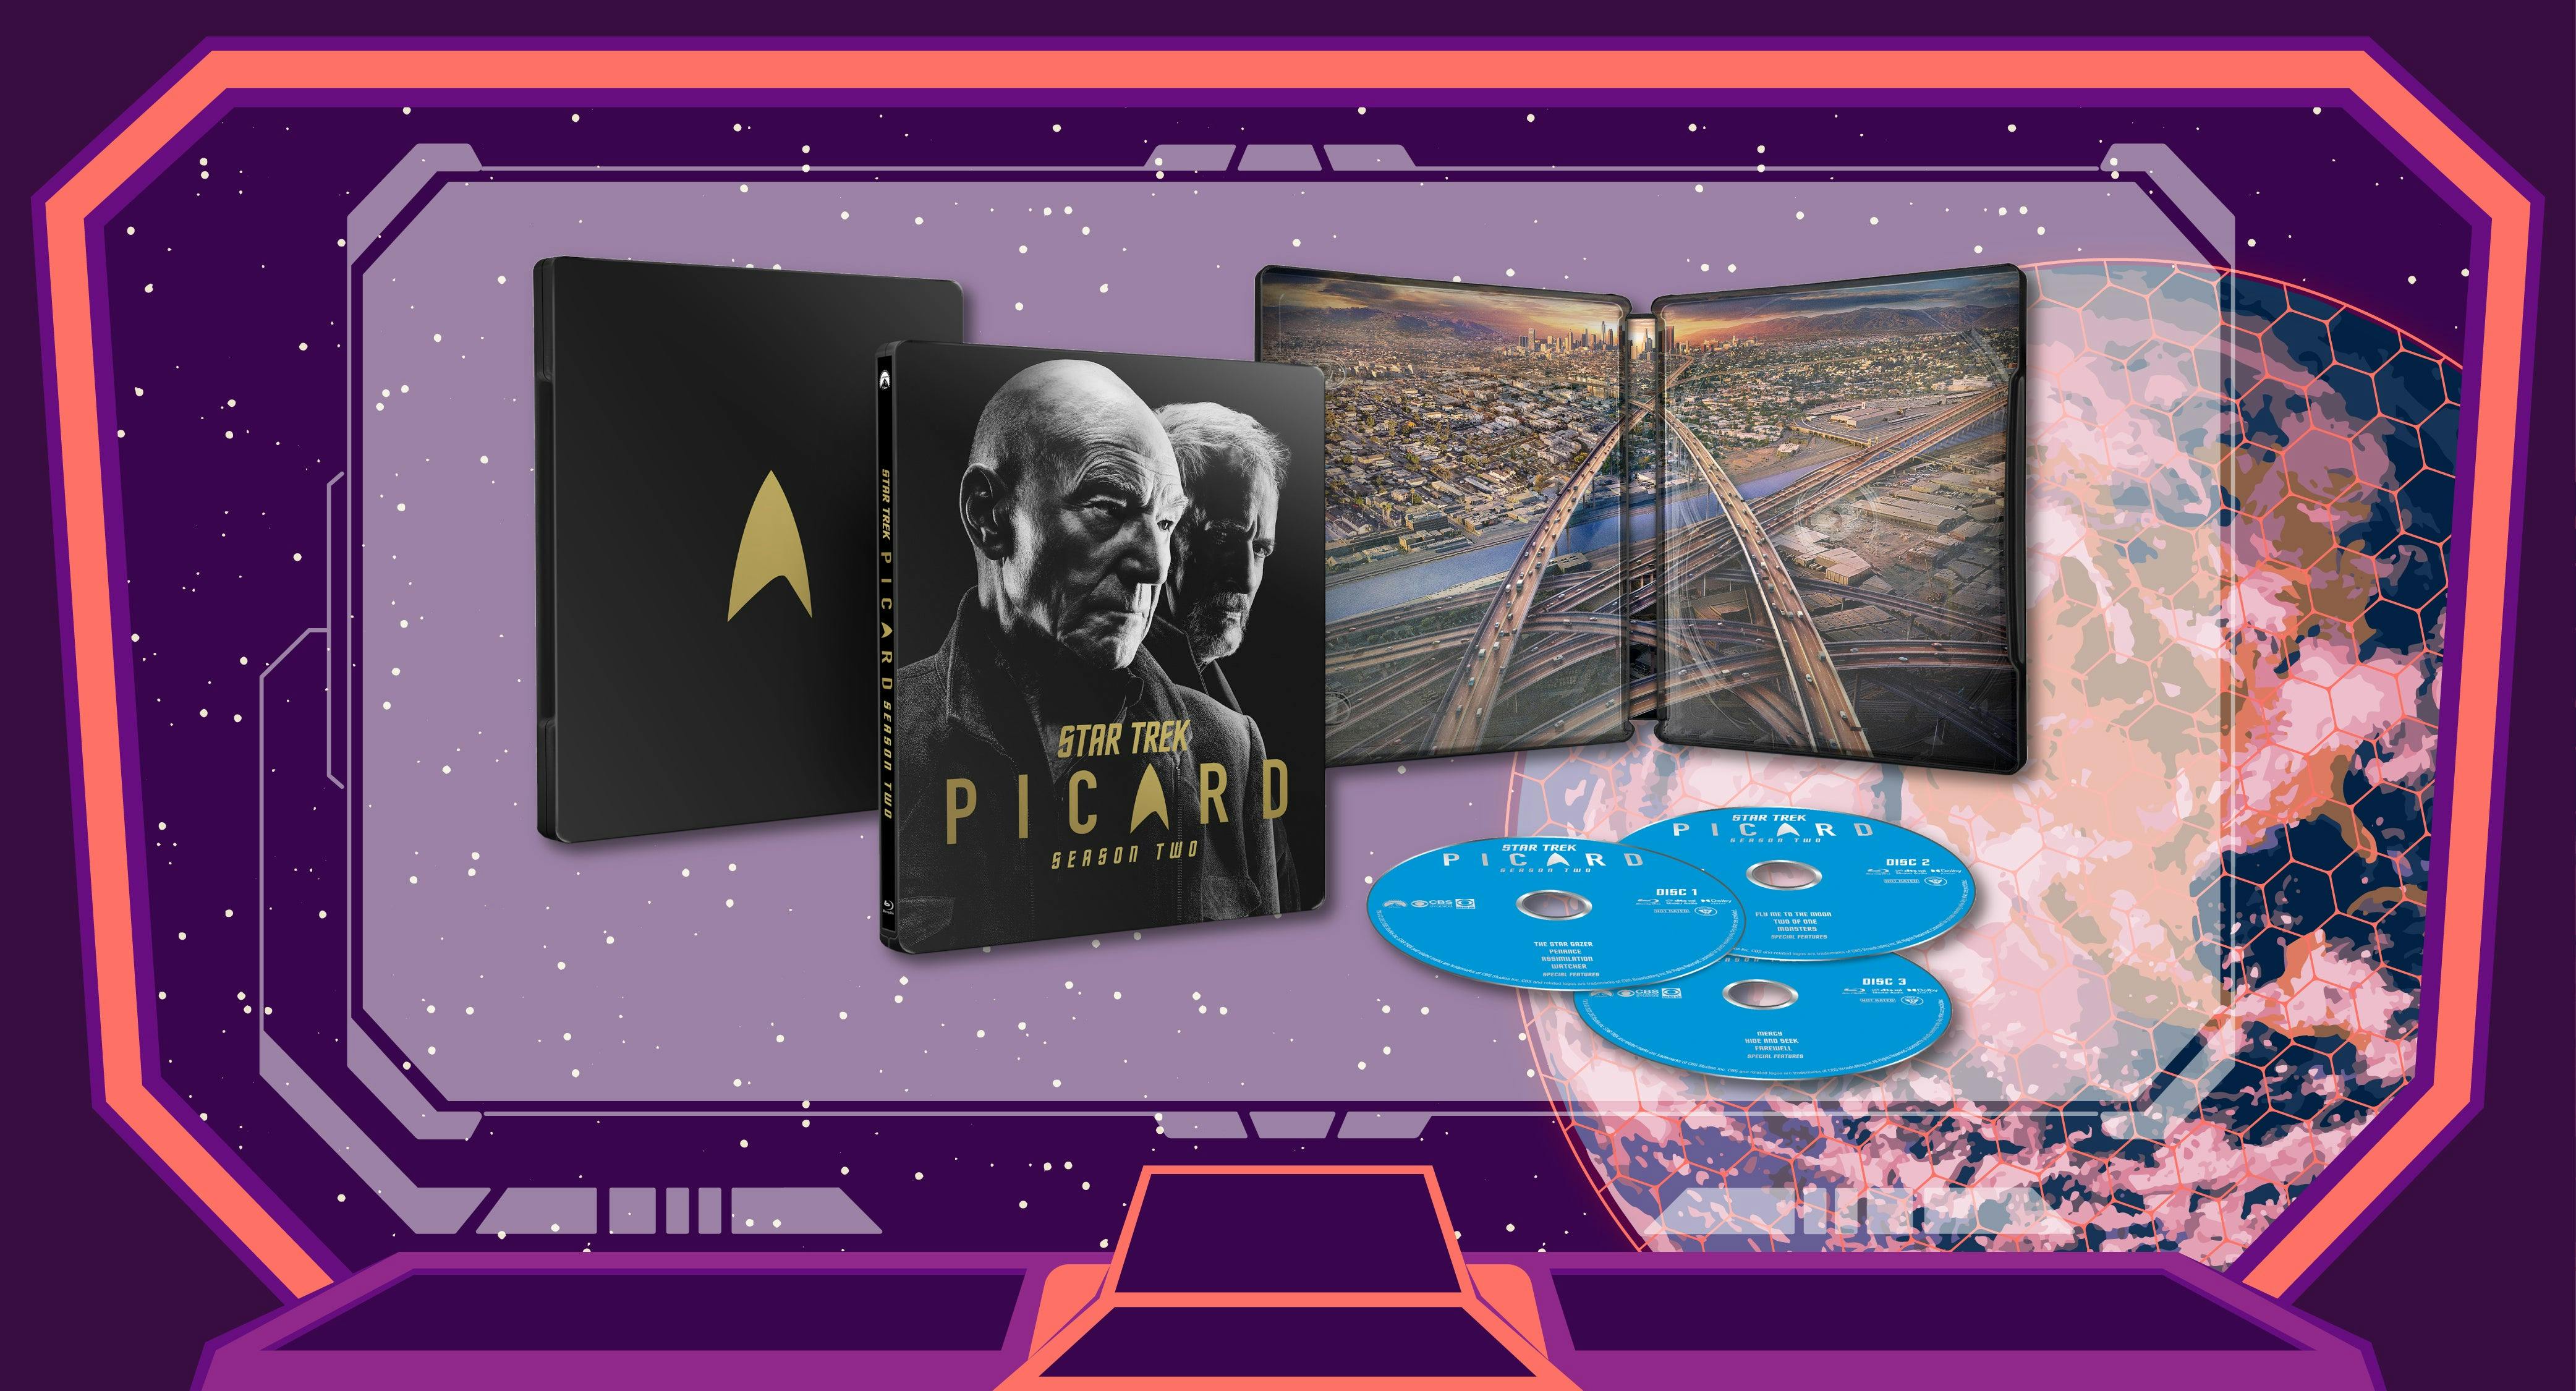 The Star Trek: Picard steelbook - including the inside image of a Starfleet delta formed out of LA highways and the three blue discs that will be included - is displayed against a purple viewscreen.